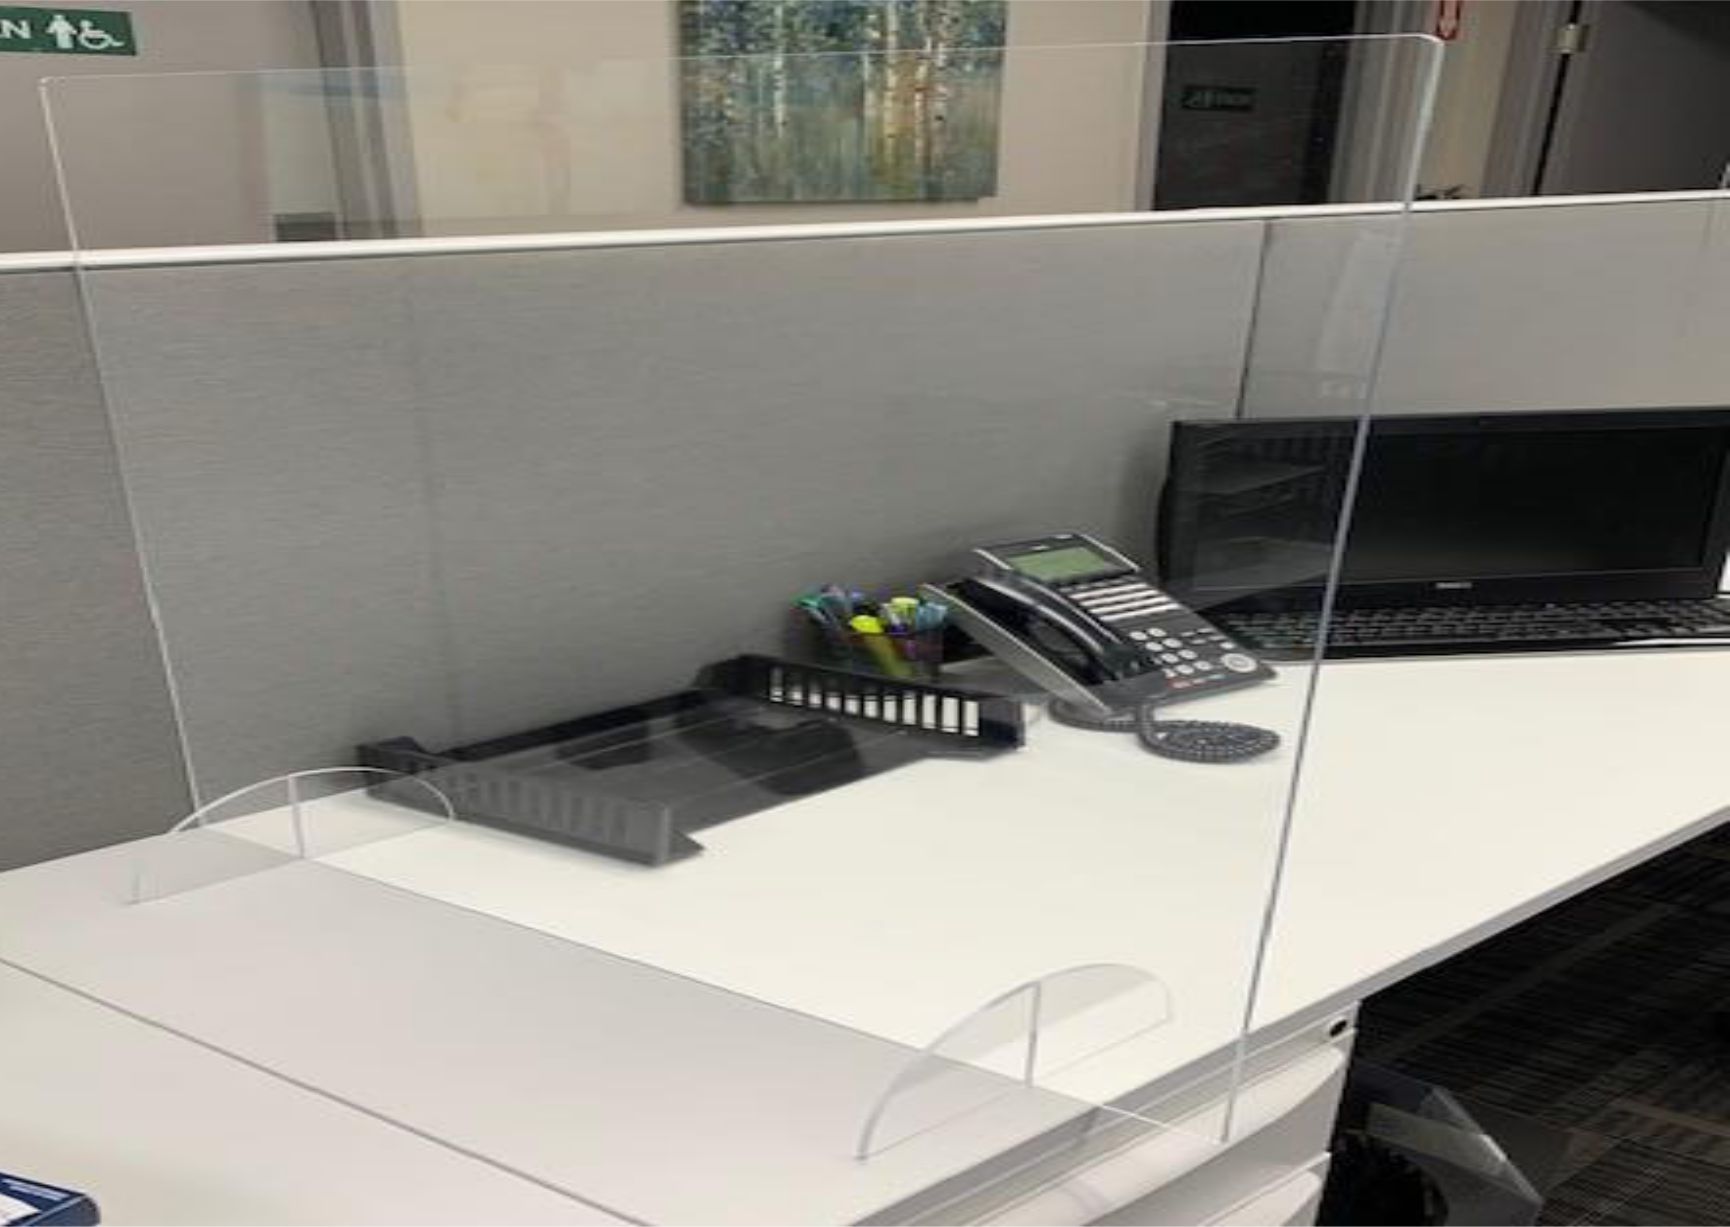 Office Desk With Laptop and Phone